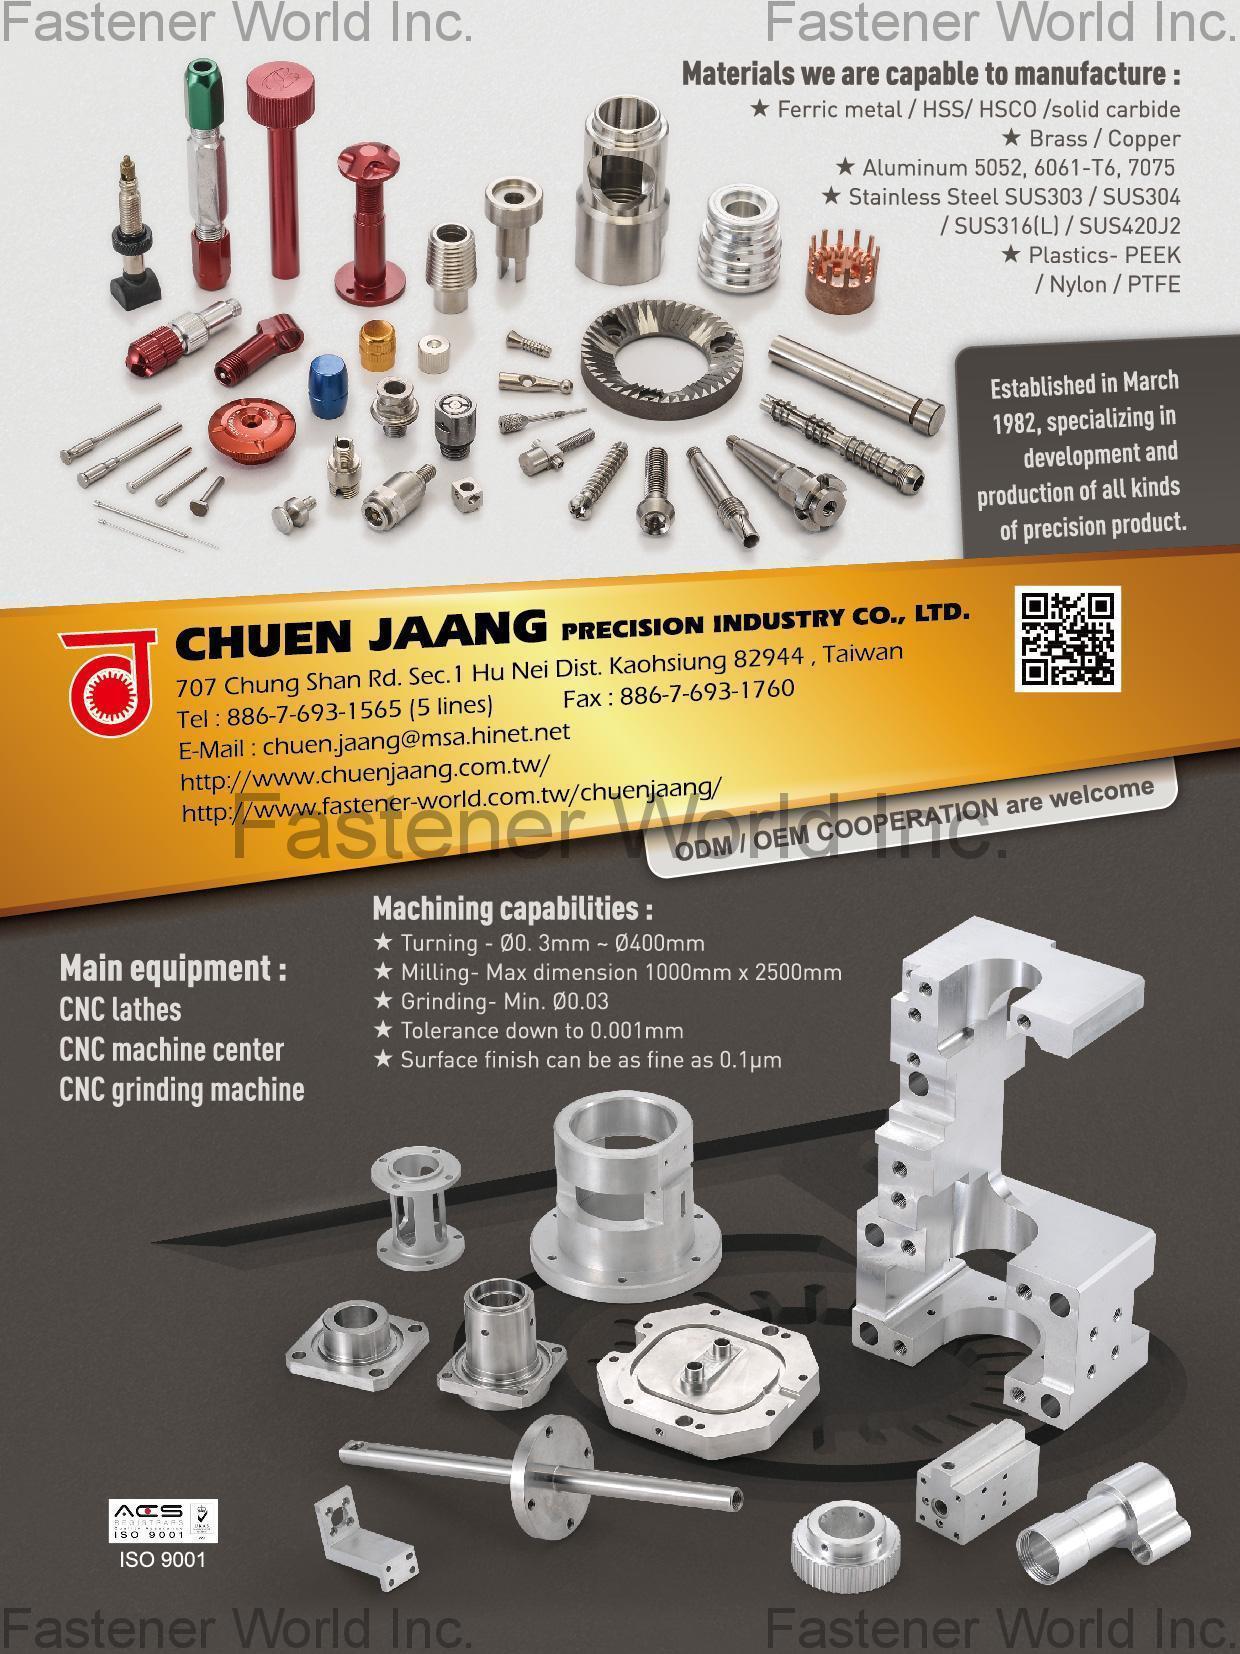 CHUEN JAANG PRECISION INDUSTRY CO., LTD. , Semiconductor LED inspection equipment parts, CNC Complex Form Tumed & Ground Parts, Auto and Motorcycle Parts, Electrocital Trasmission Parts and Connectors, Precision Machined Parts, Parts and Tools for Mould & Die Industry, Customed Rotary Cutting Tools , Precision Metal Parts